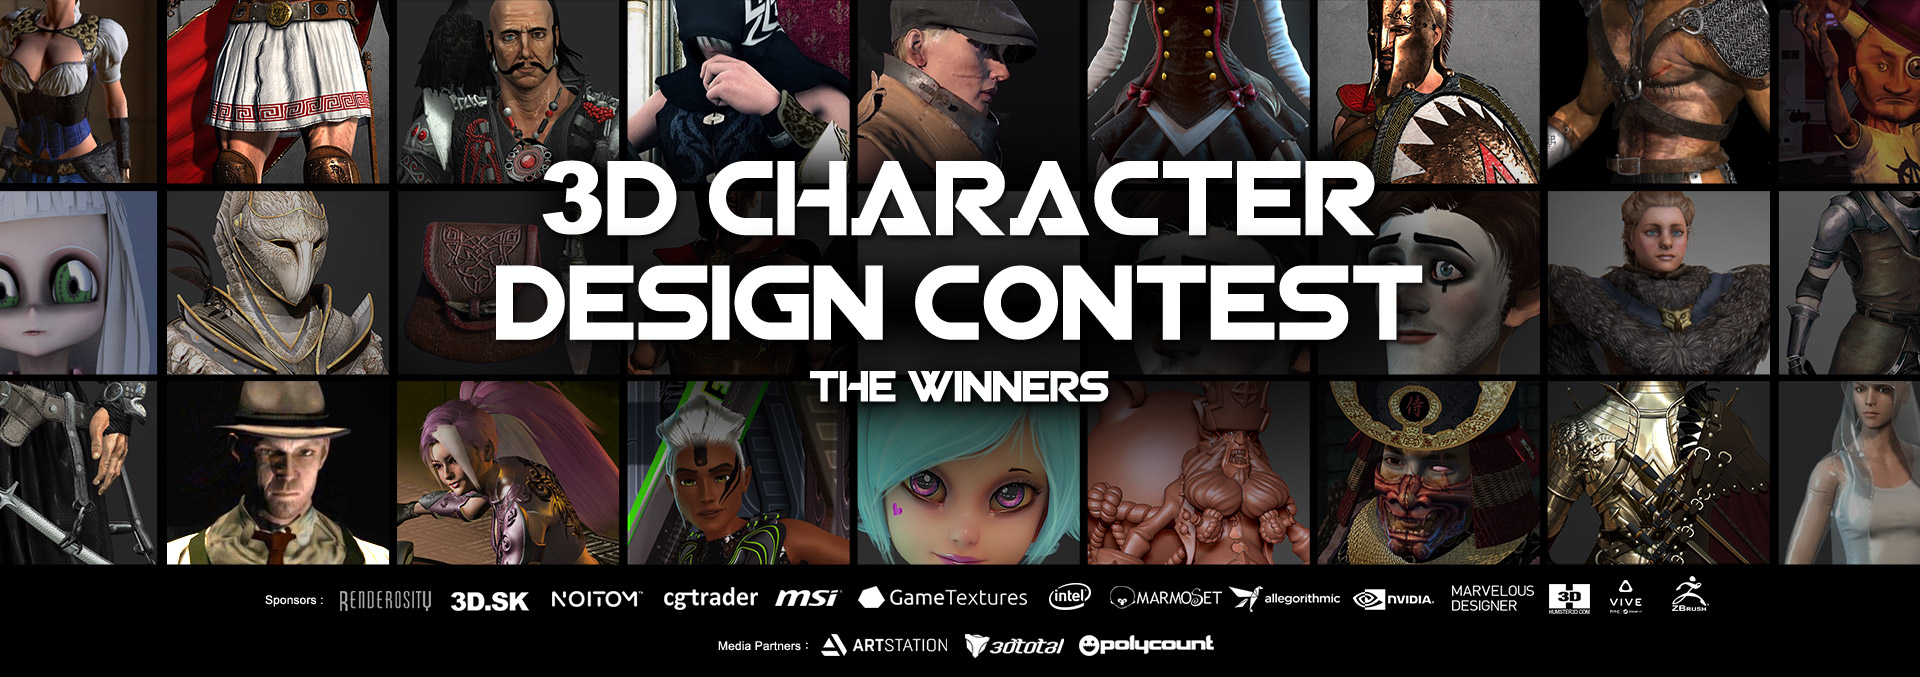 iClone 3D character design contest - winners